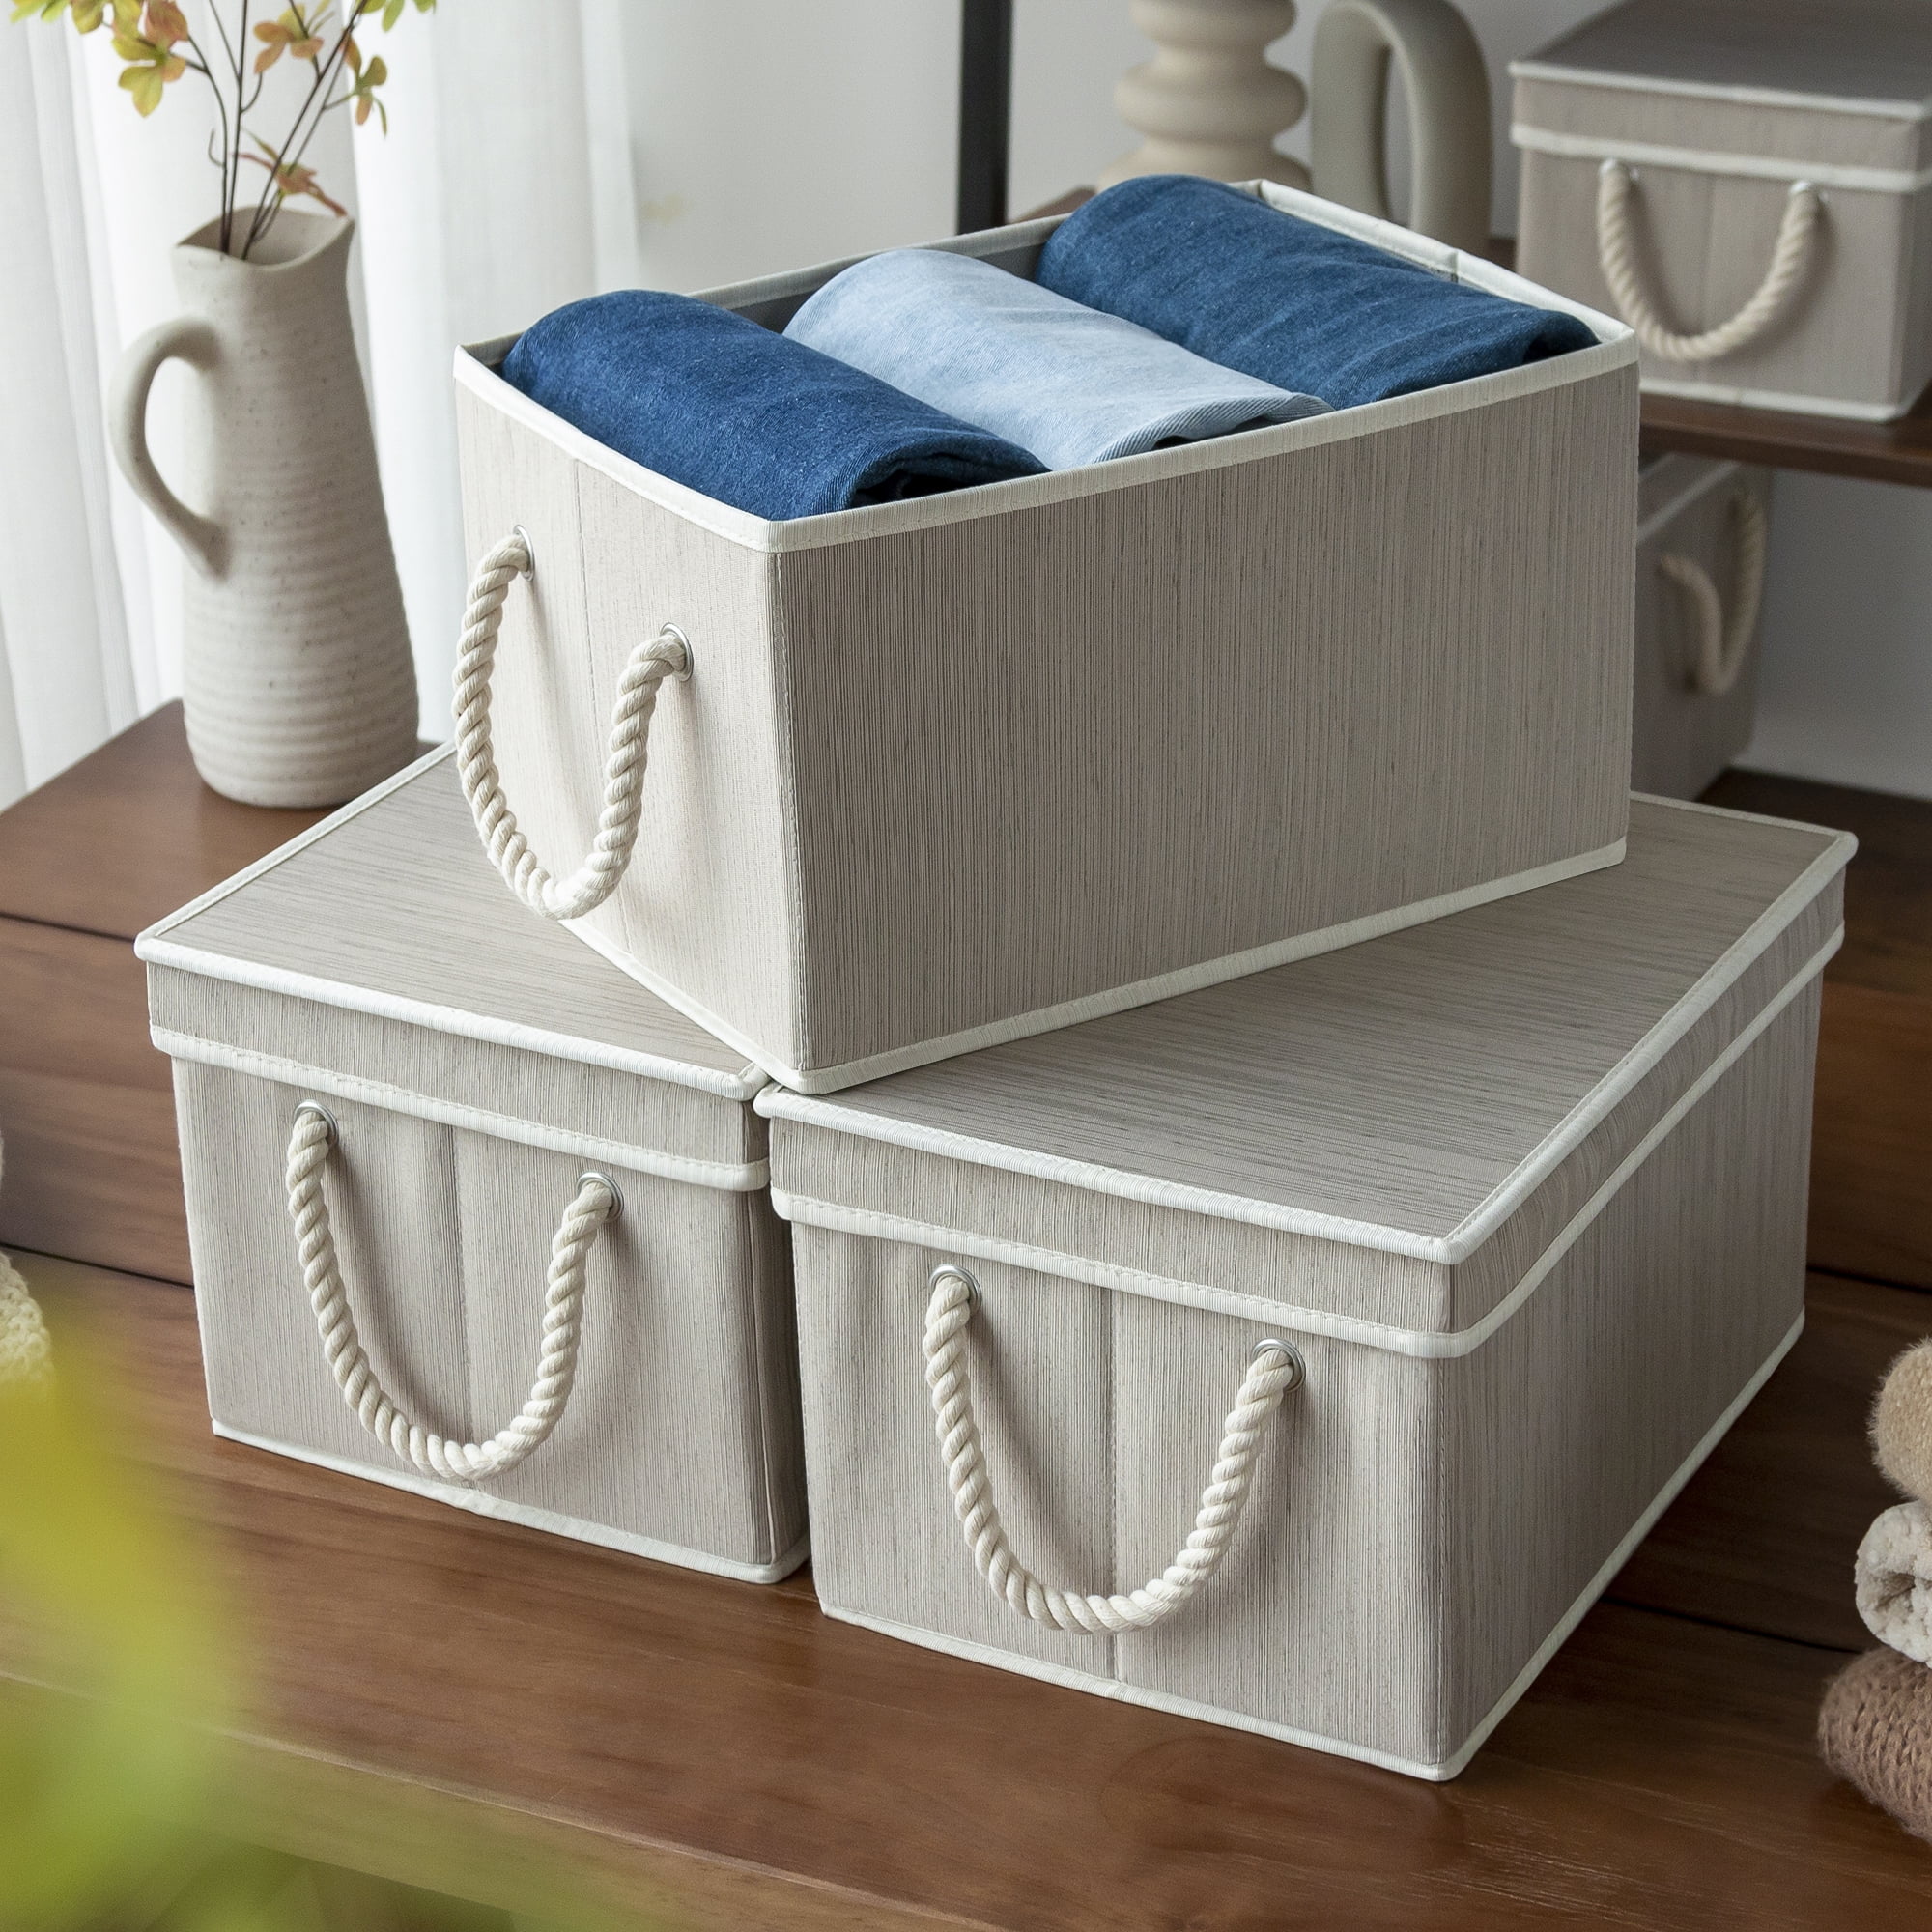 TYEERS Collapsible Storage Bins with Lids, Patchwork Design, Washable,  Fabric Storage Boxes for Organizing, 14.9x9.8x9.8 inches